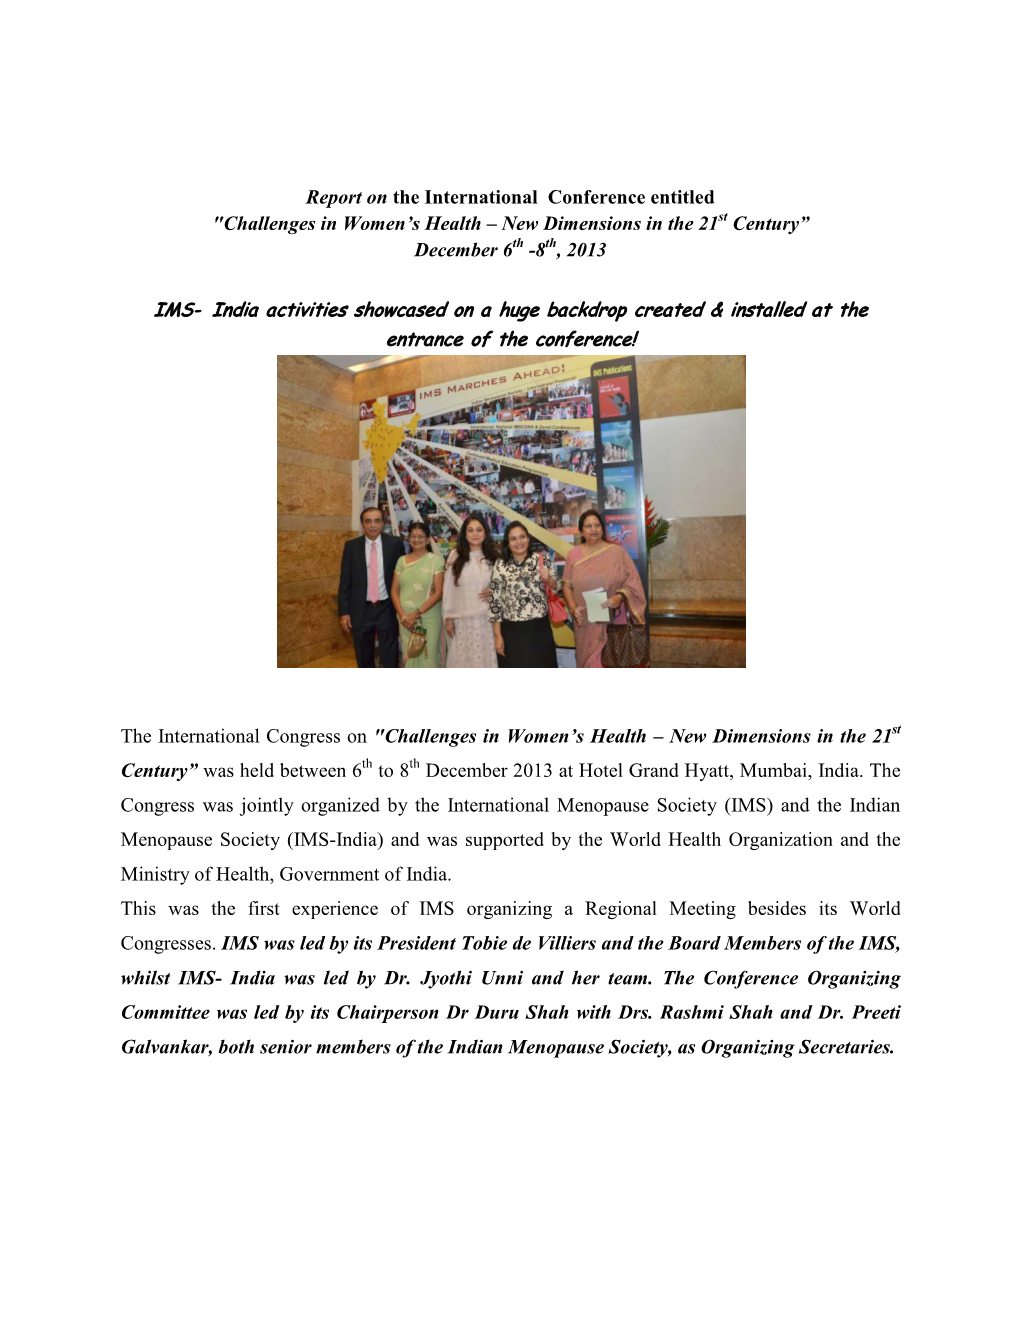 Report on the International Conference Entitled "Challenges in Women’S Health – New Dimensions in the 21St Century” December 6Th -8Th, 2013